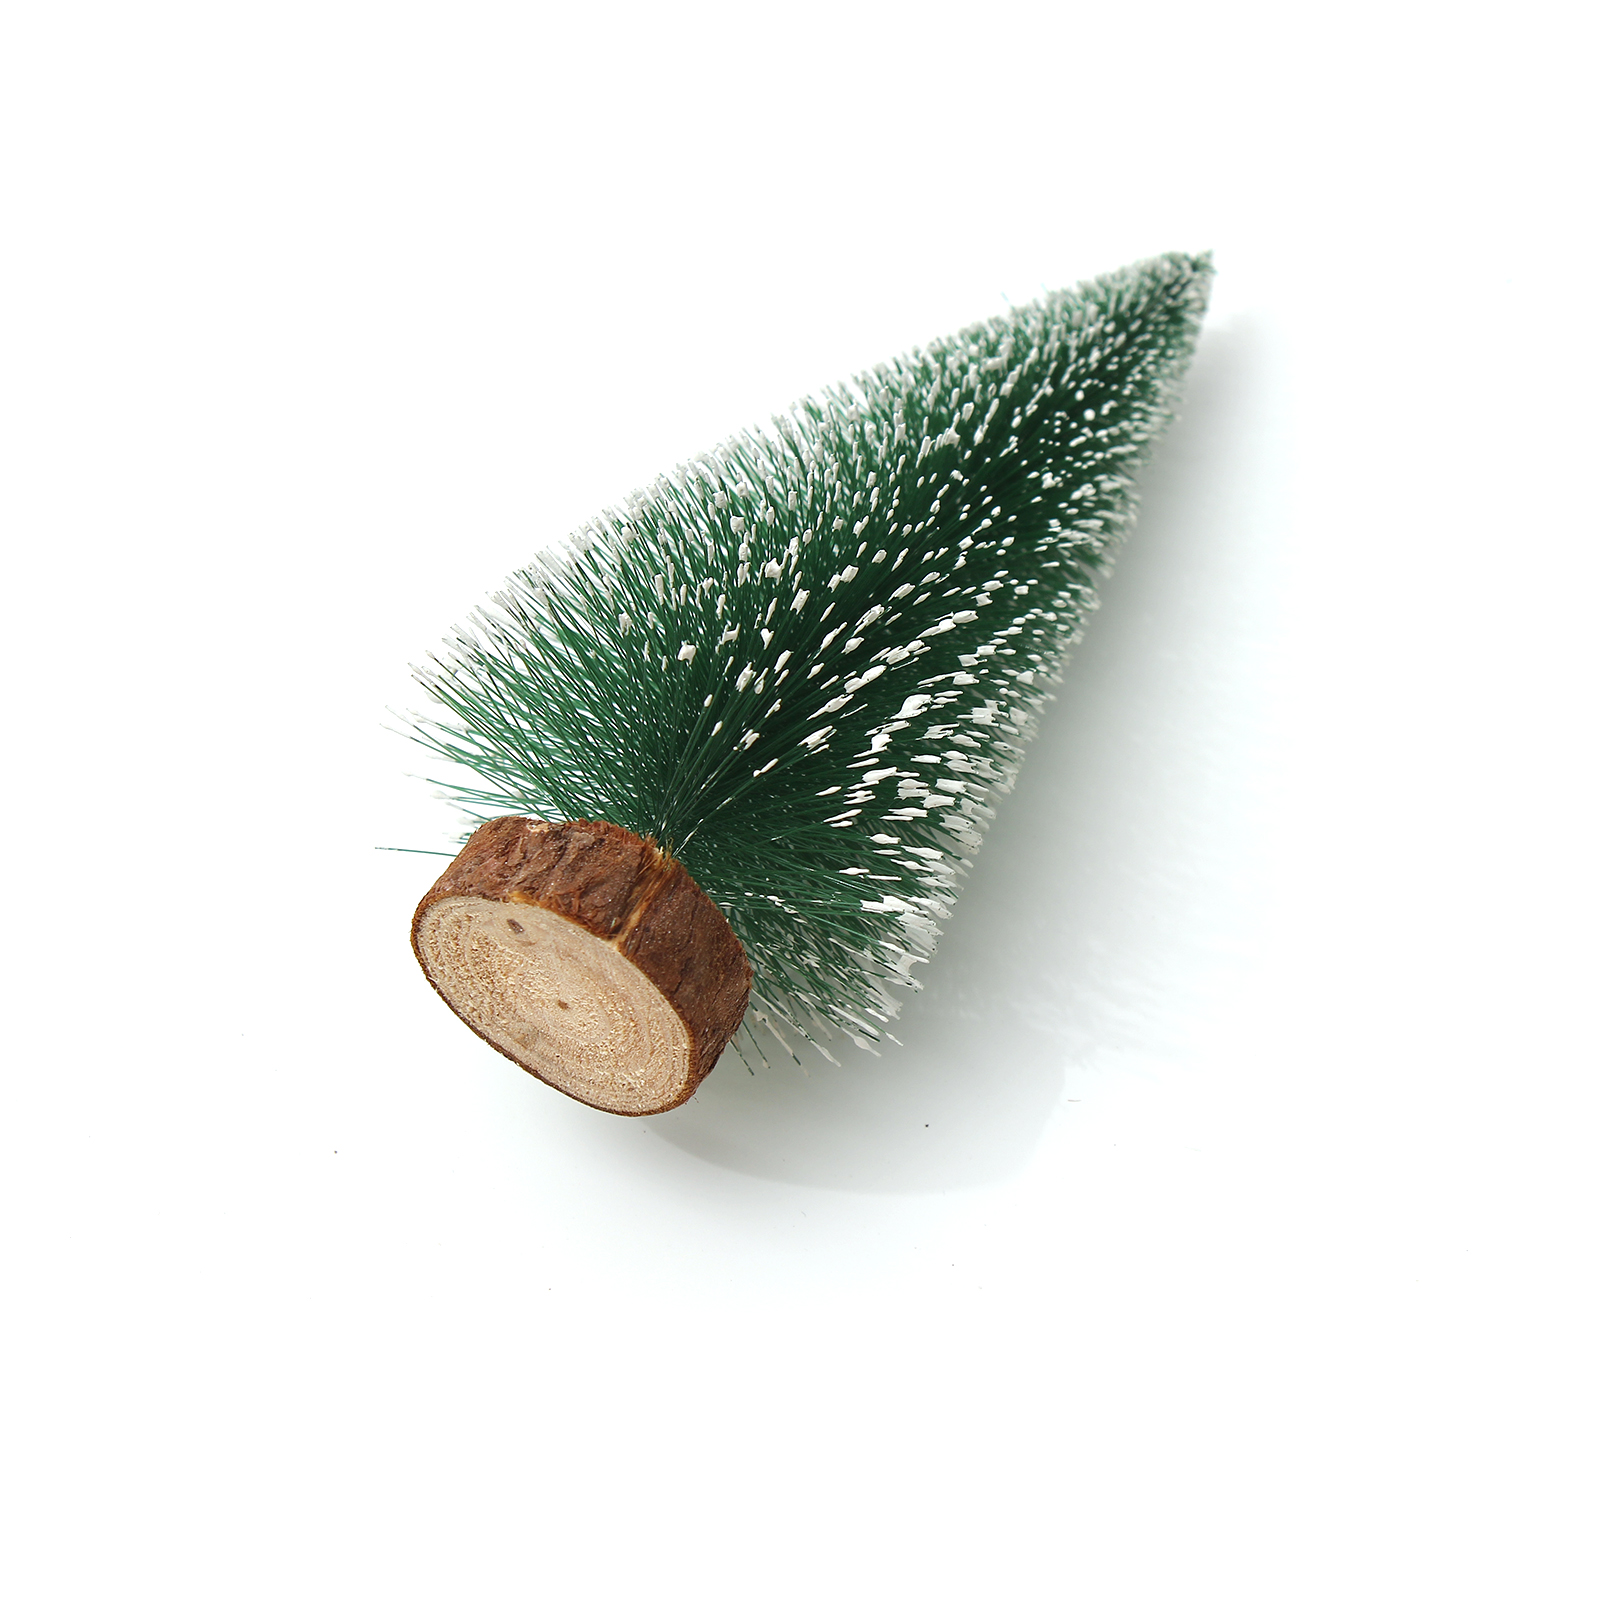 Laozai Christmas trees of synthetic material,Artificial Mini Christmas Trees, Miniature Sisal Frosted Christmas Trees Bottle Brush Trees for Xmas Home Tabletop Decor